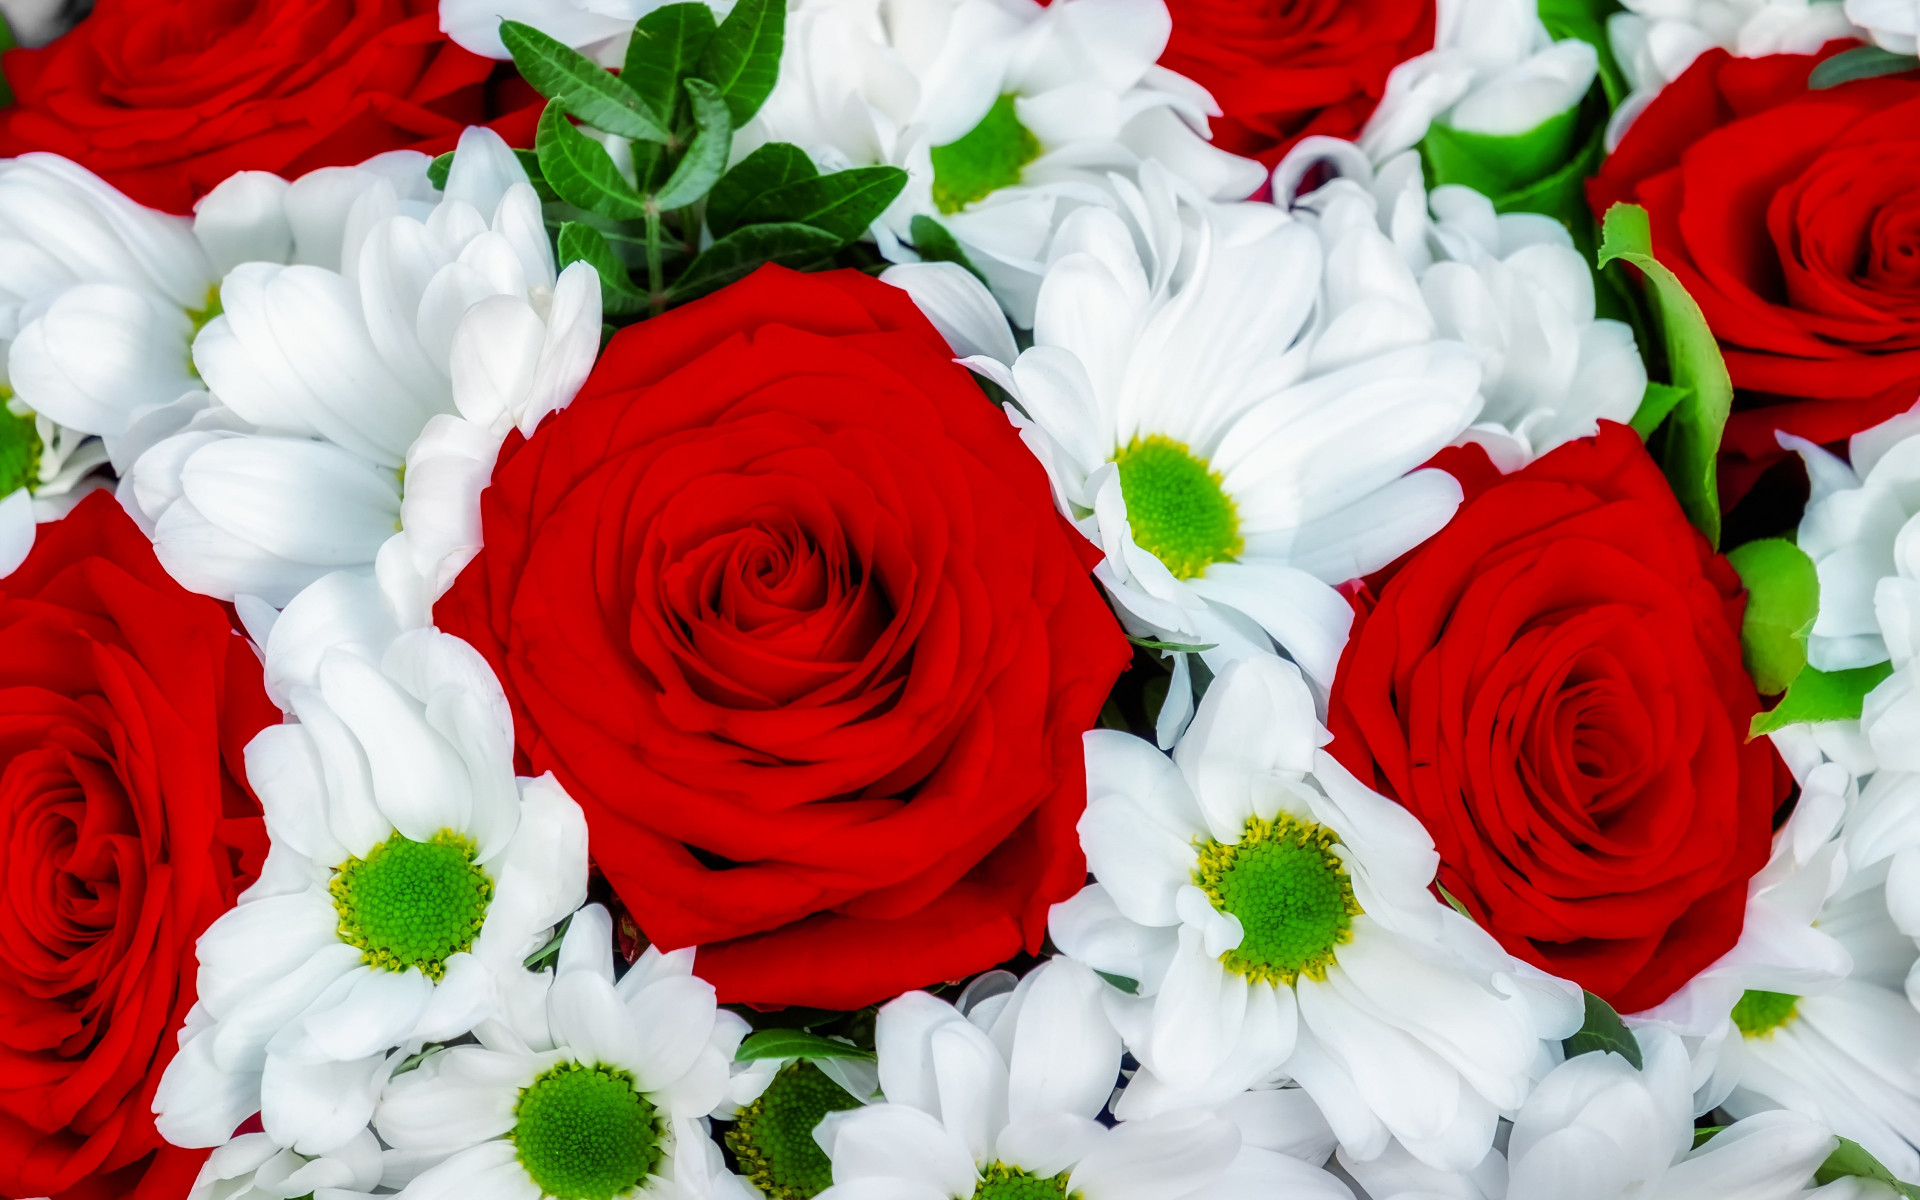 Roses and daisies bouquet wallpaper 1920x1200